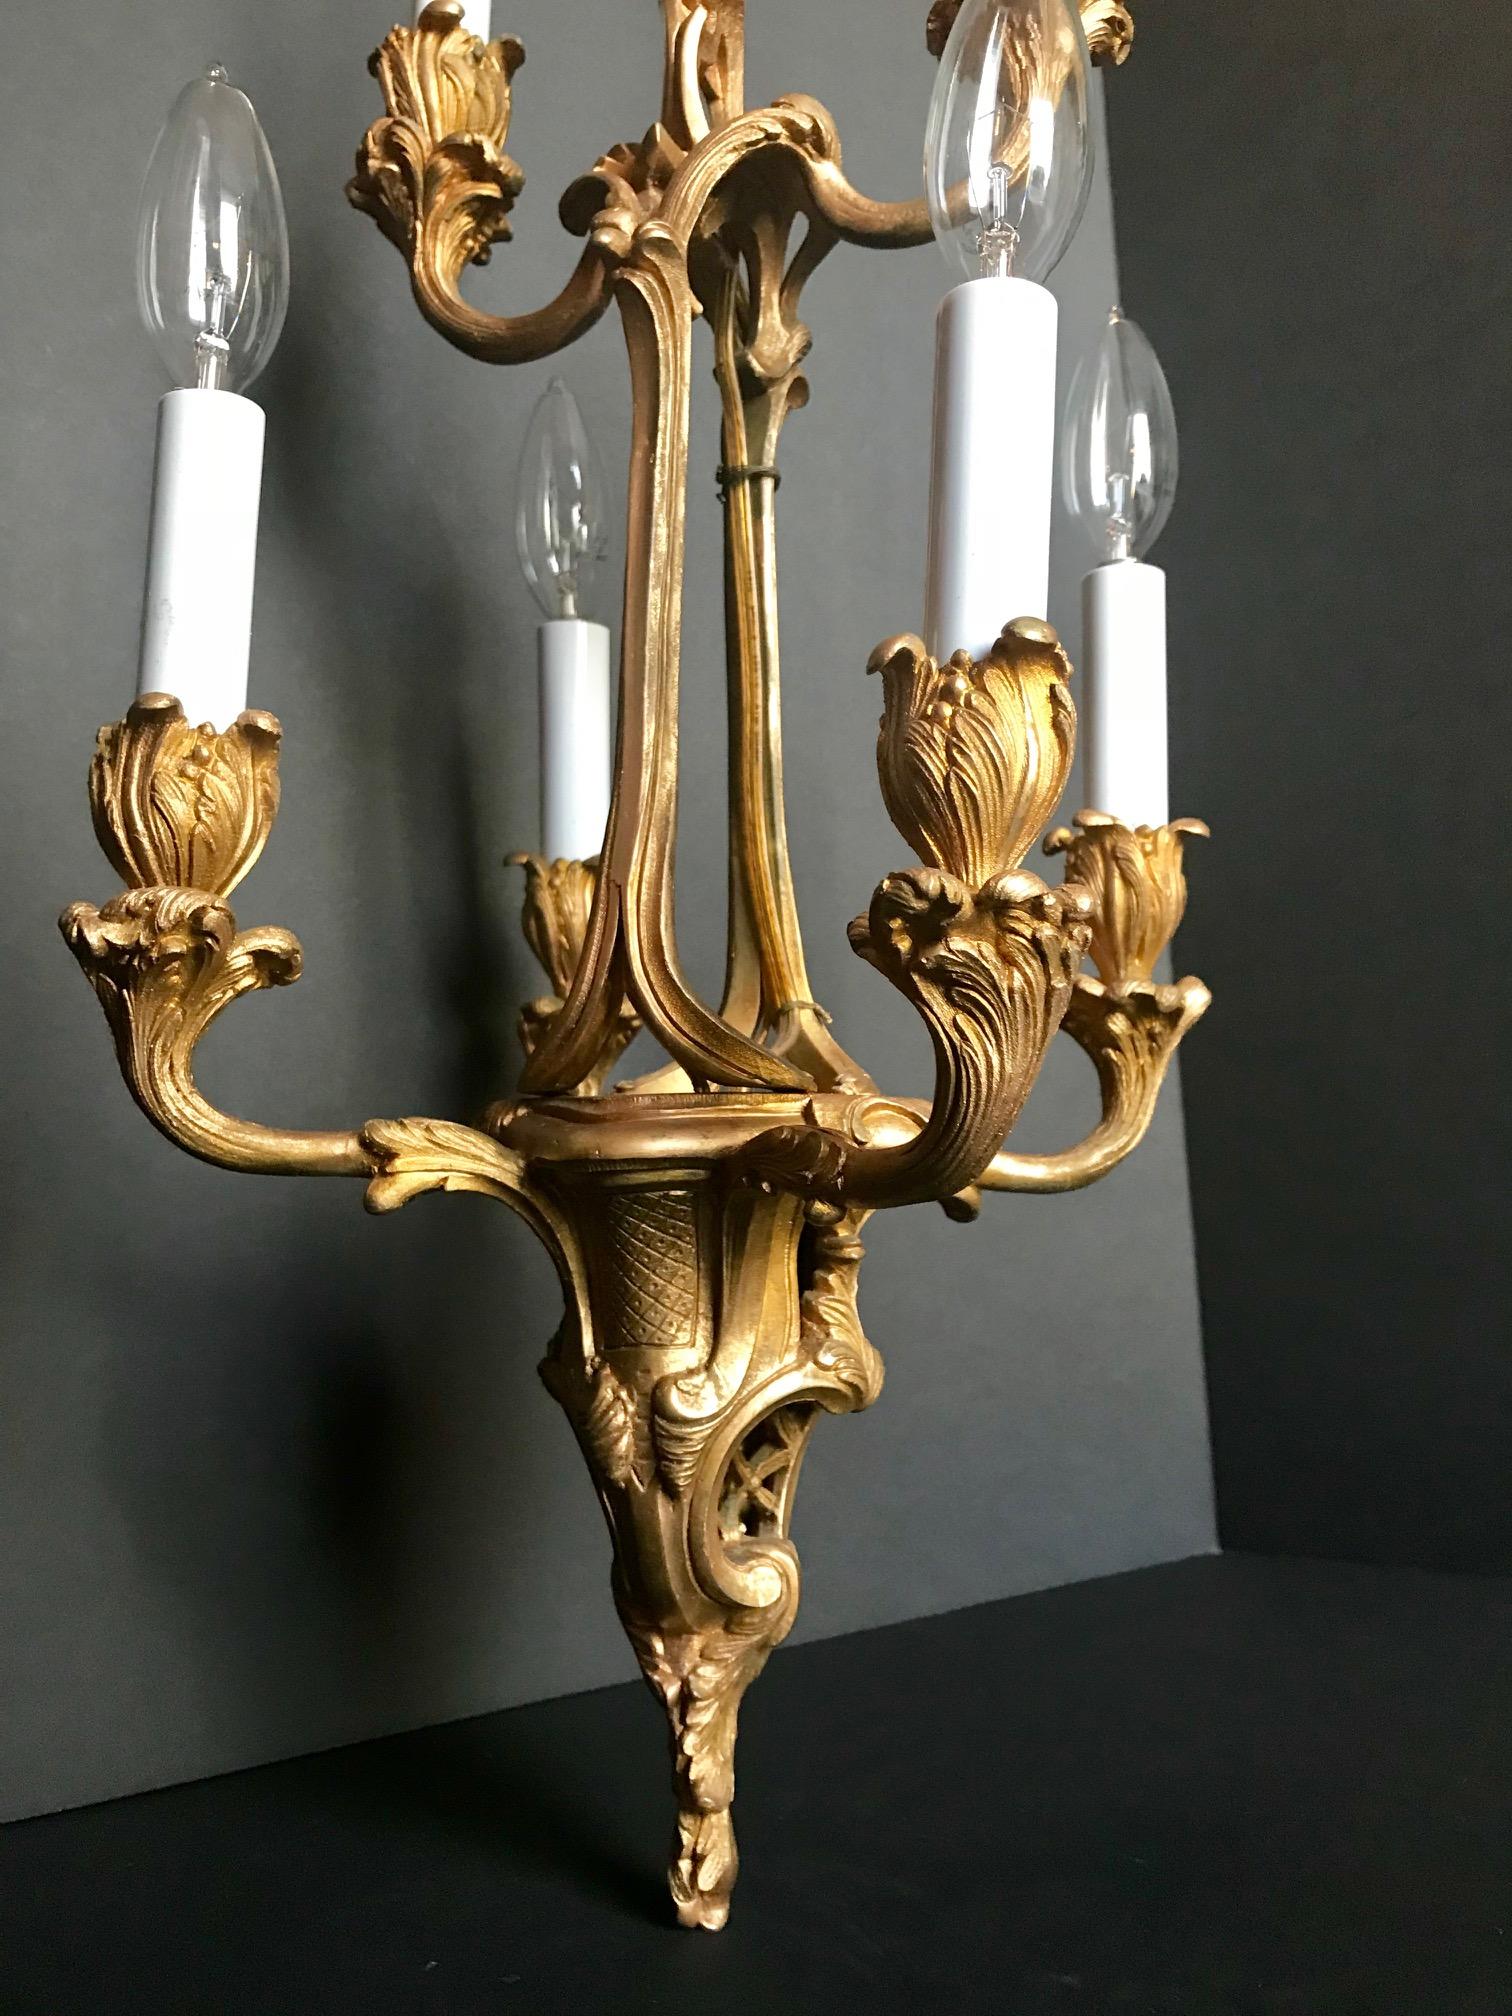 The six arms are in the form of swirling acanthus leaves in the exuberant Louis XV style. This finely chased chandelier was made in France, circa 1870. A high quality bronze casting.

Size: 19 H x 11